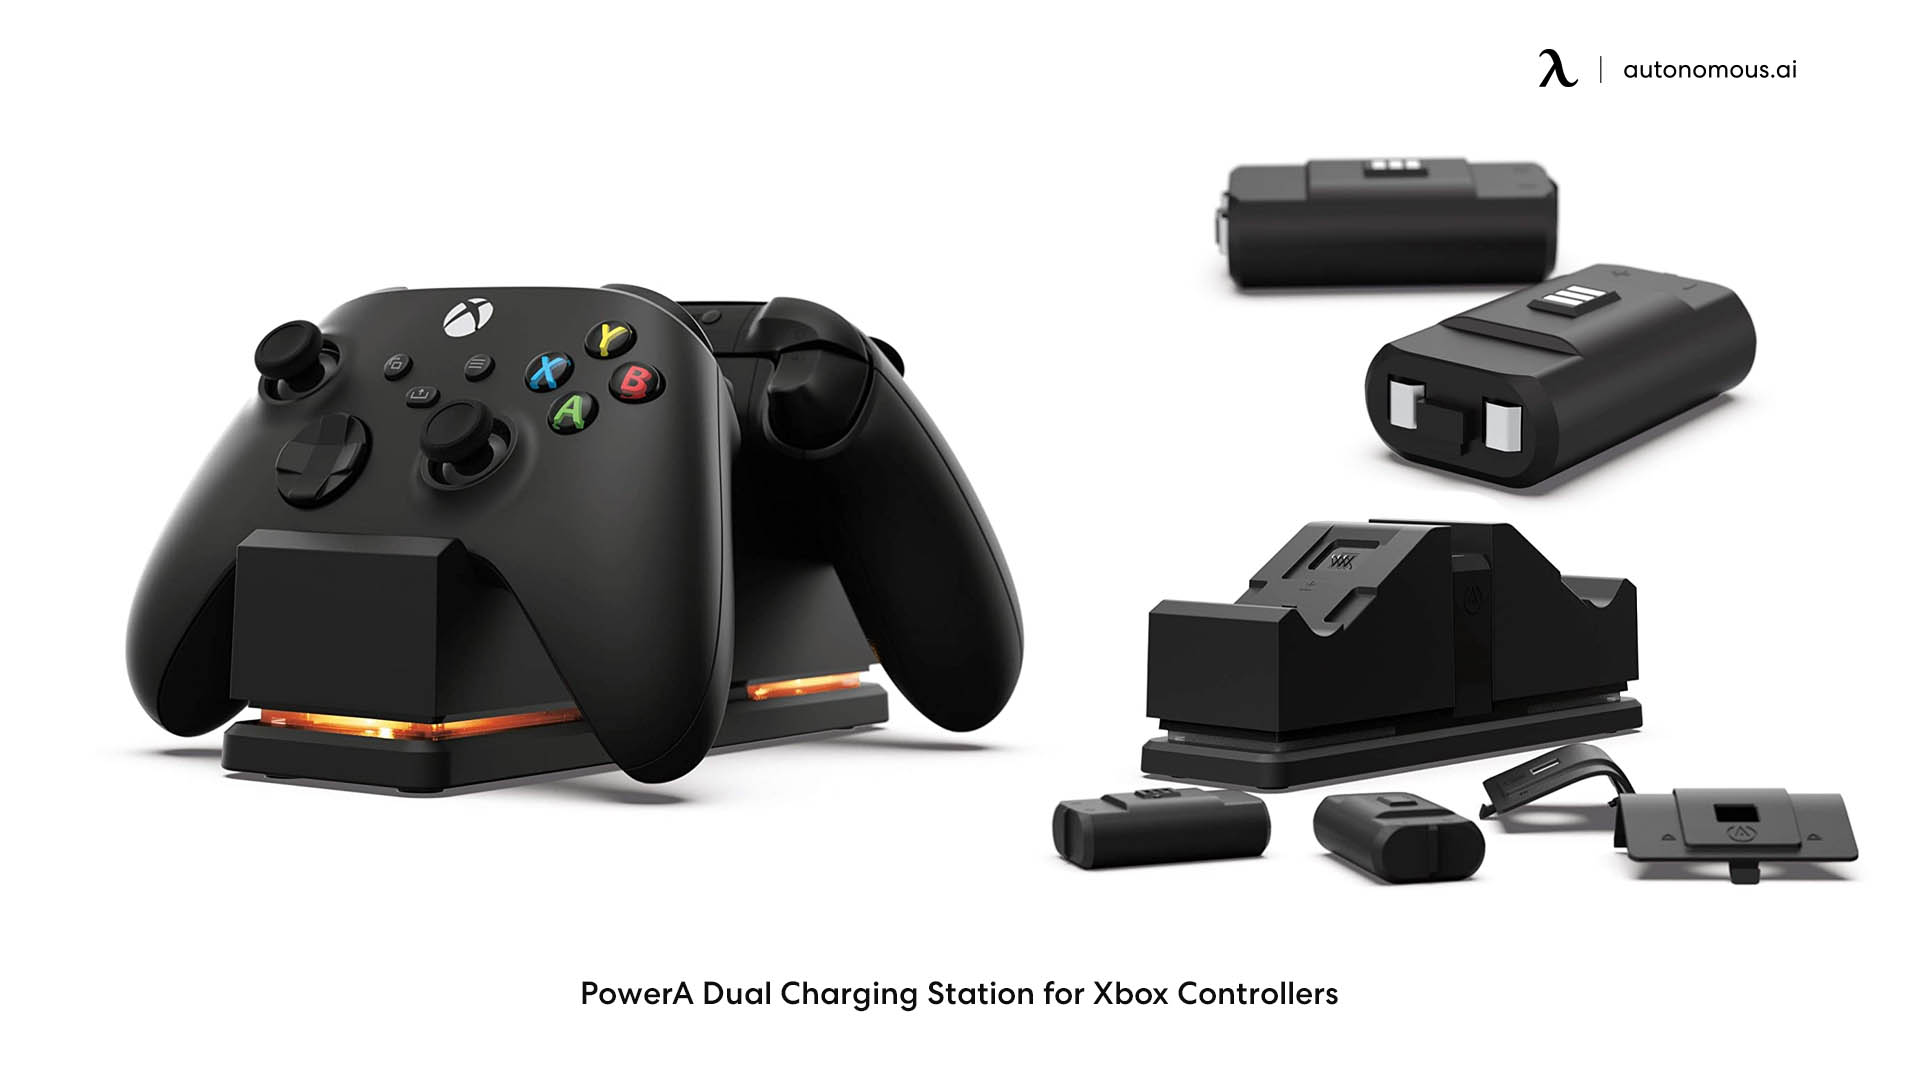 PowerA Dual Charging Station for Xbox Controllers